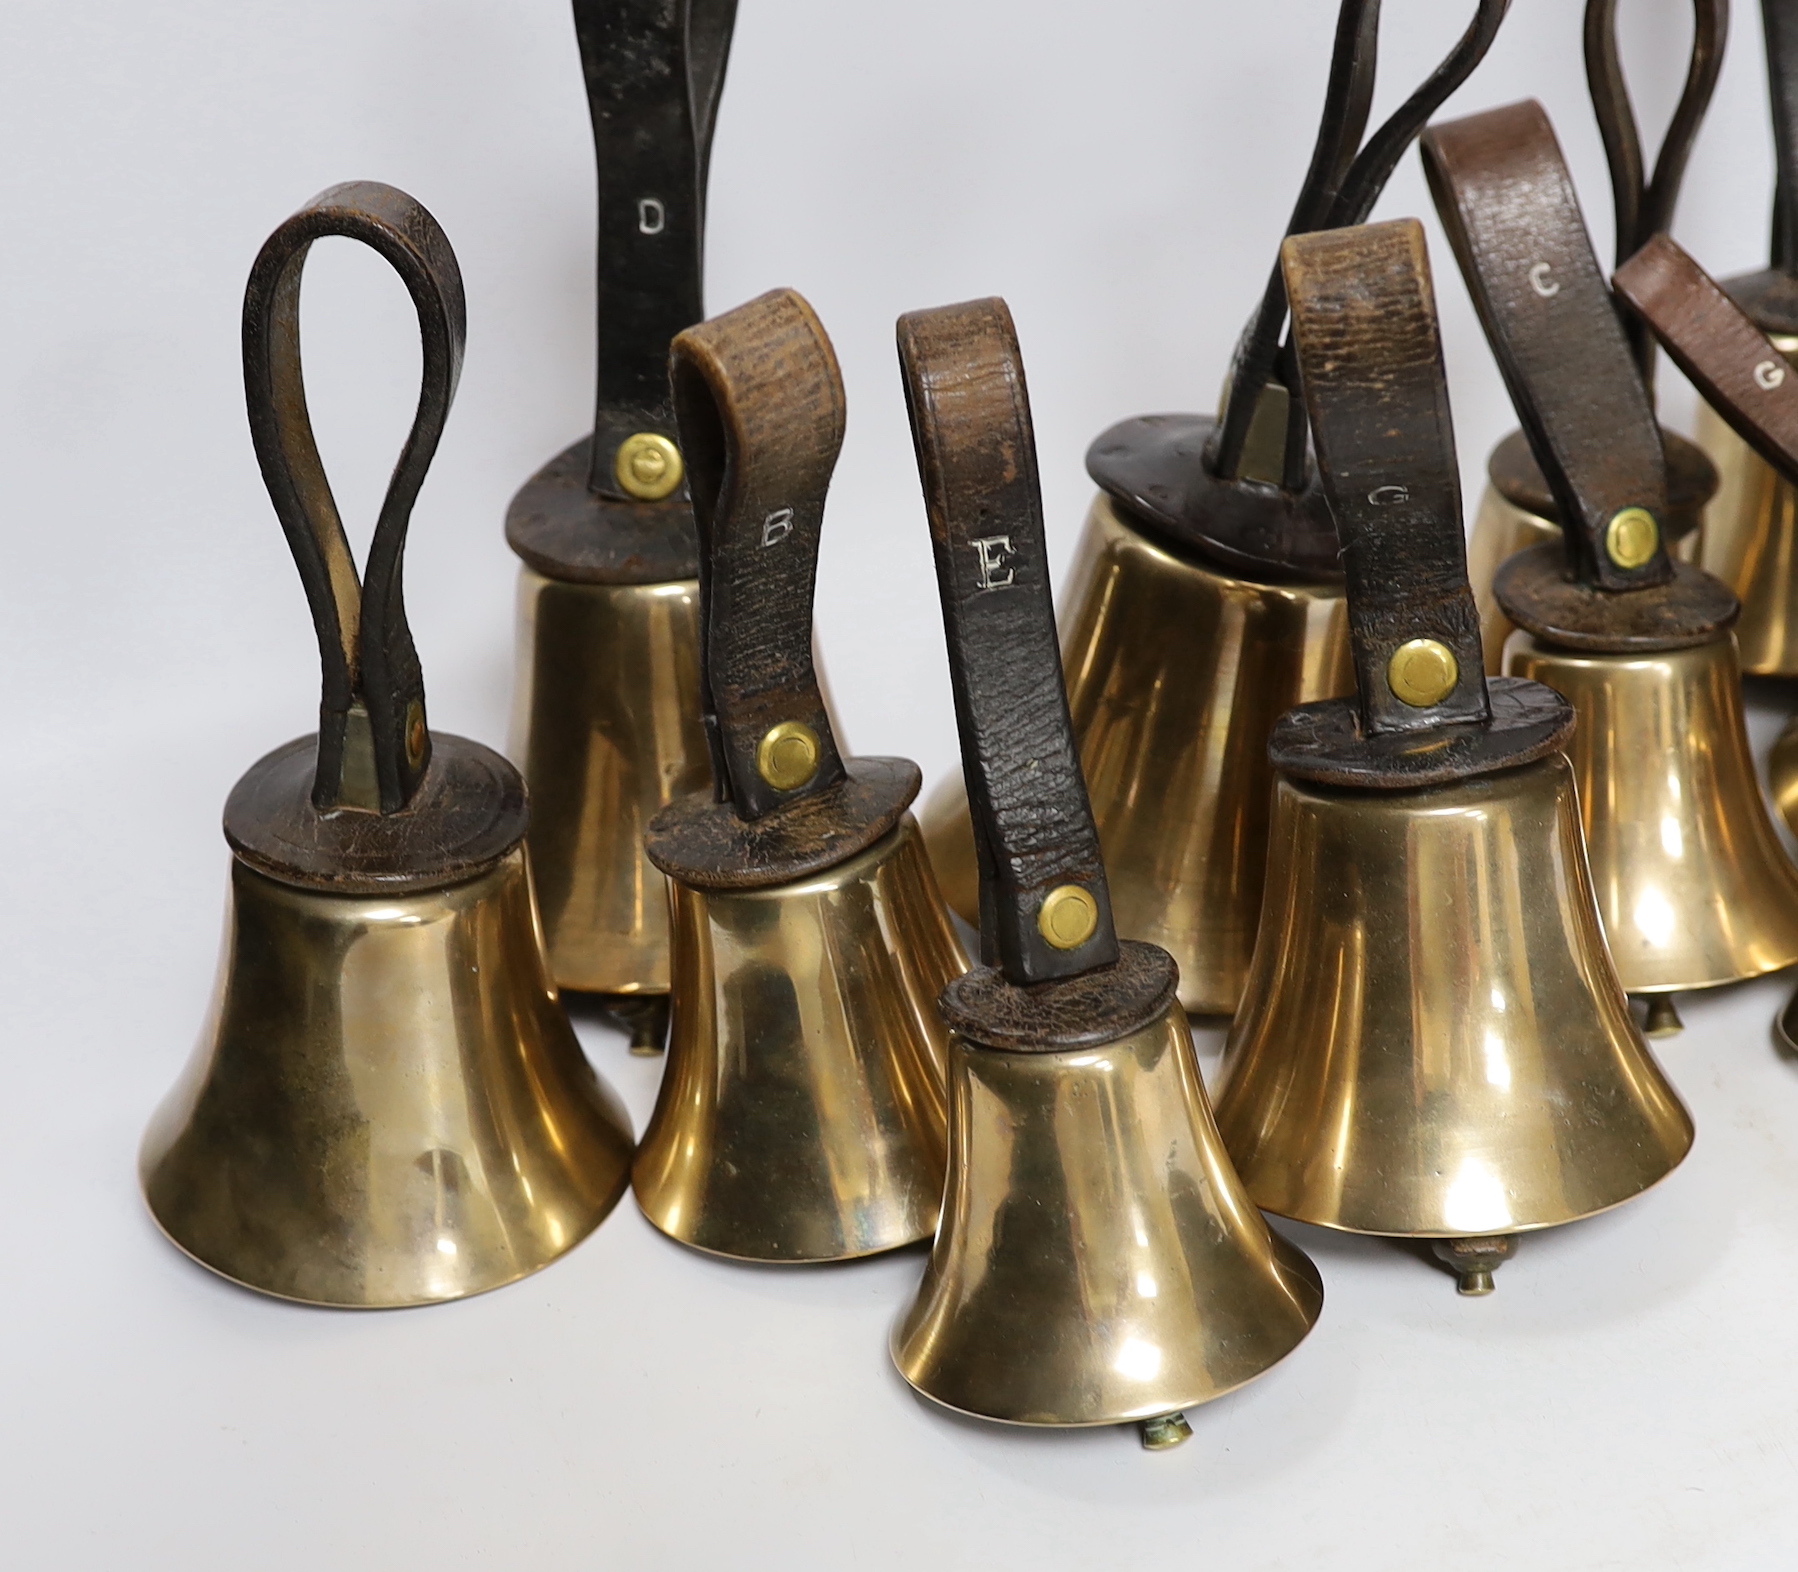 A set of thirty two musical handbells, full chromatic scale, circa 1900, largest 23cm, including leather strap